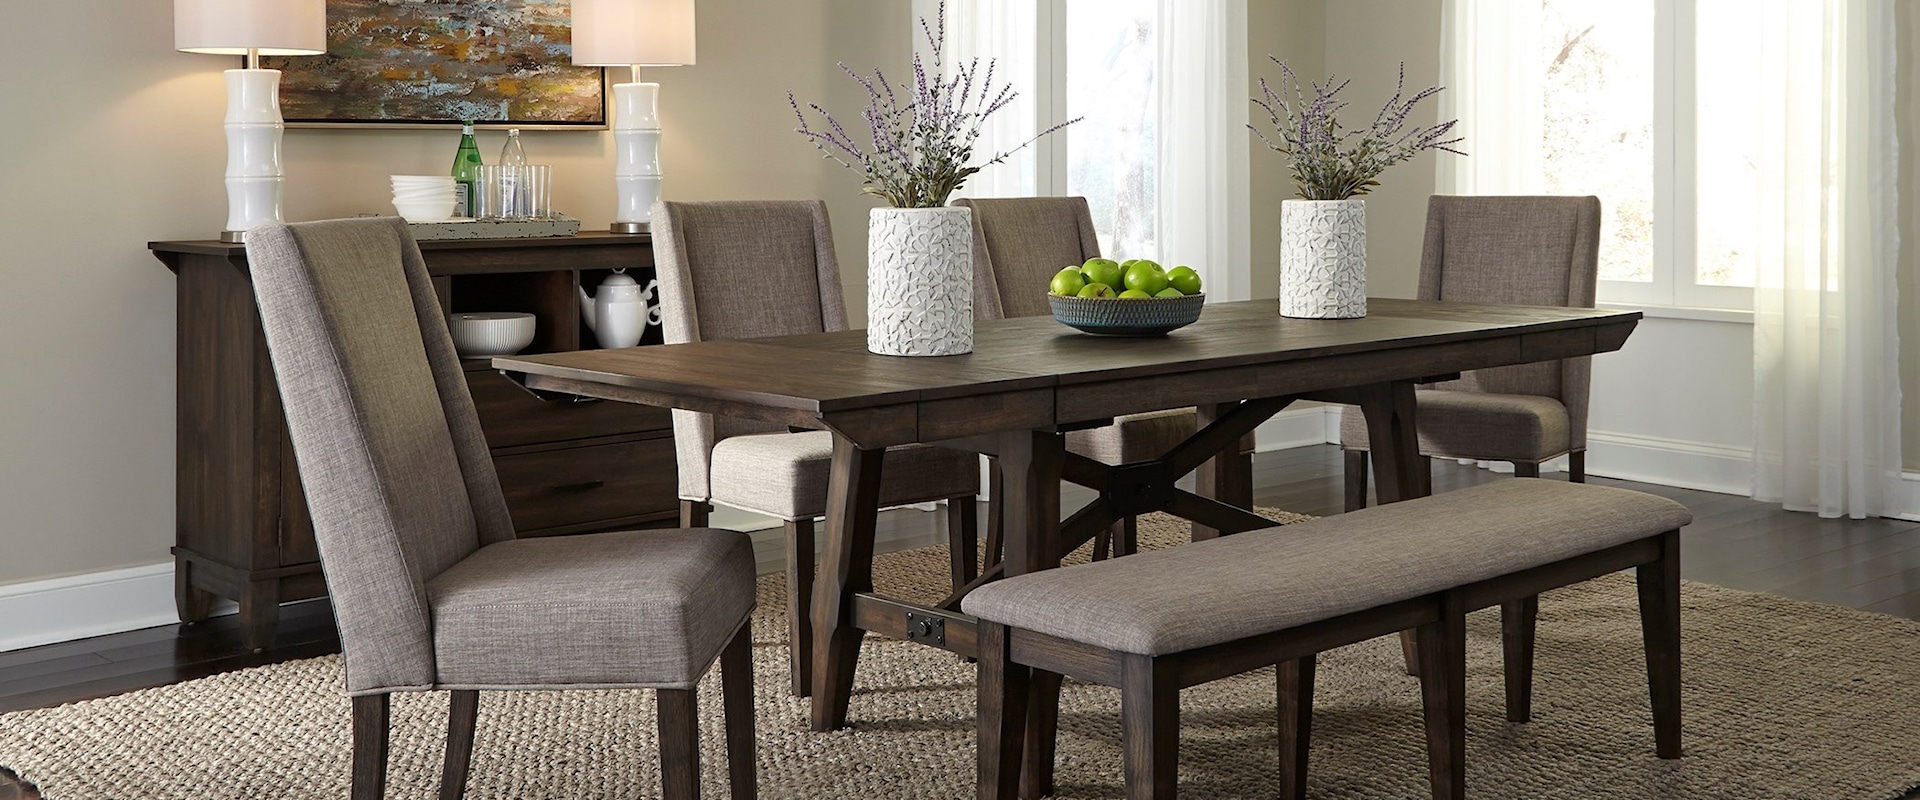 Dining Room Group